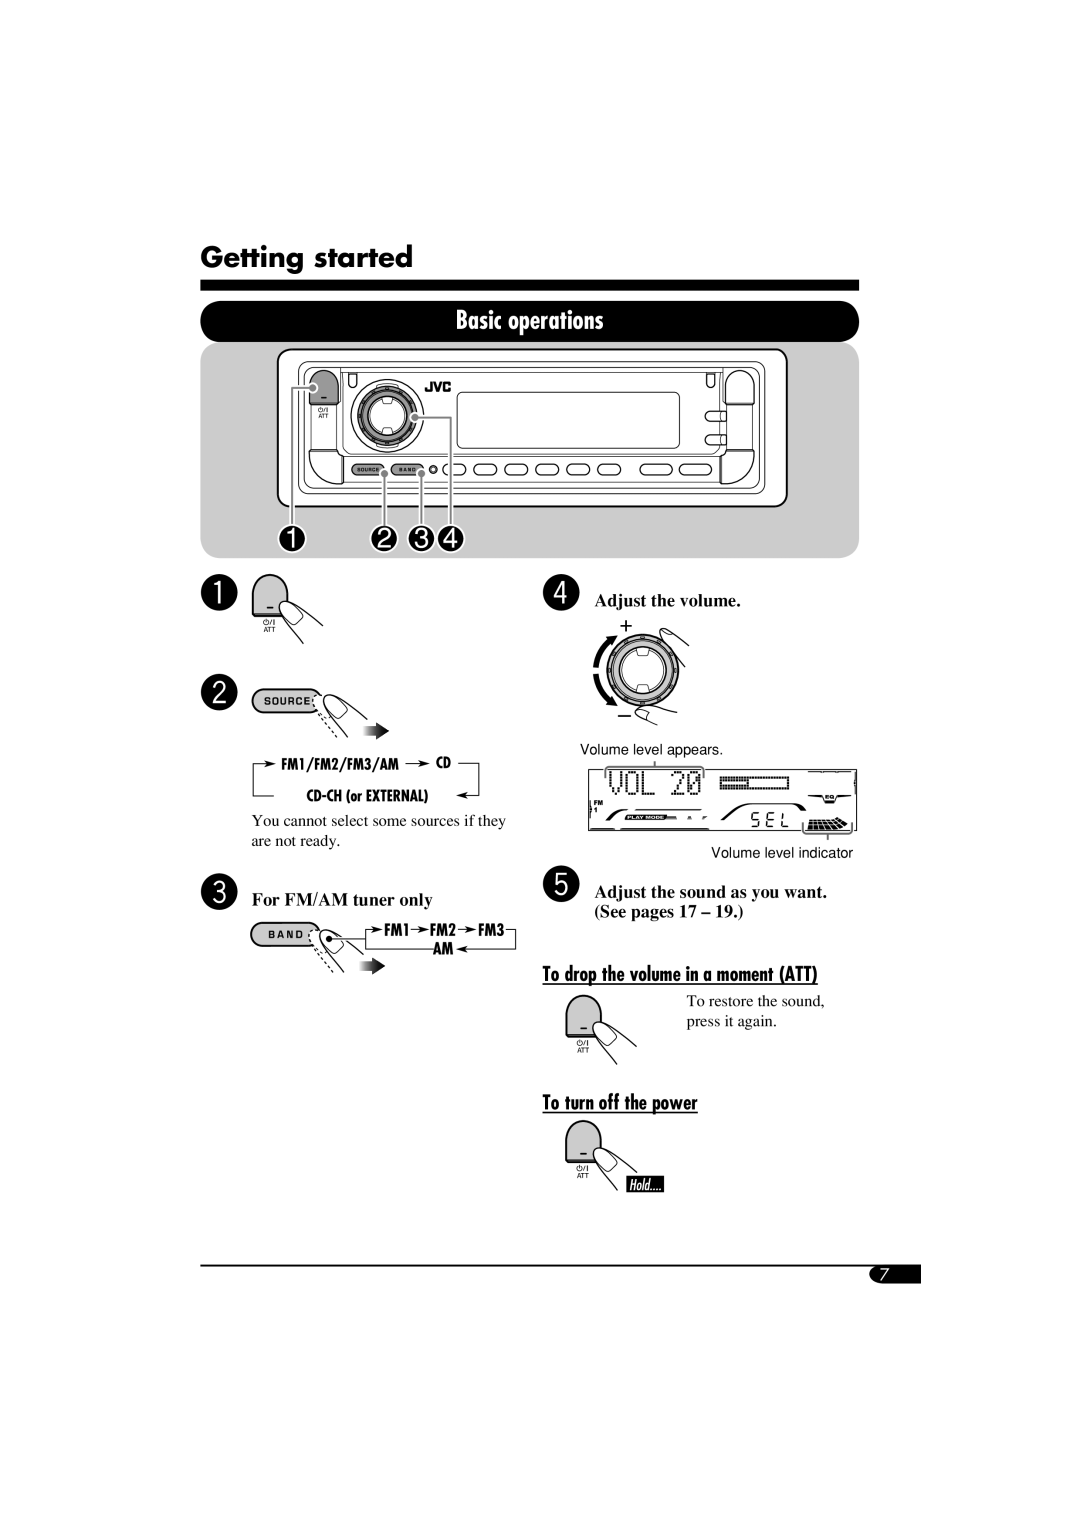 JVC KD-G814 Getting started, Basic operations, To drop the volume in a moment ATT, To turn off the power, See pages 17 